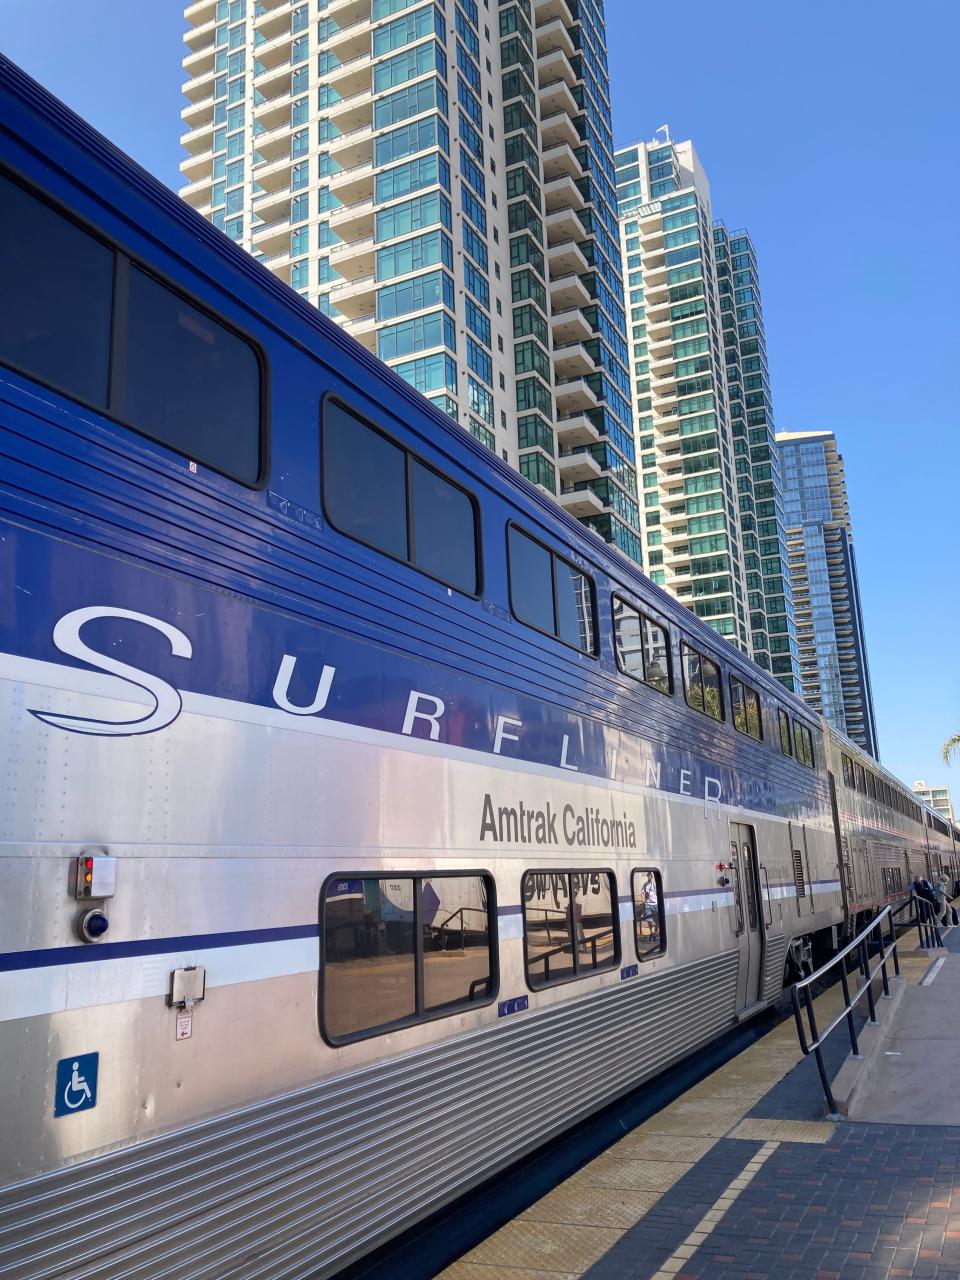 The Pacific Surfliner train, which runs along the west coast.